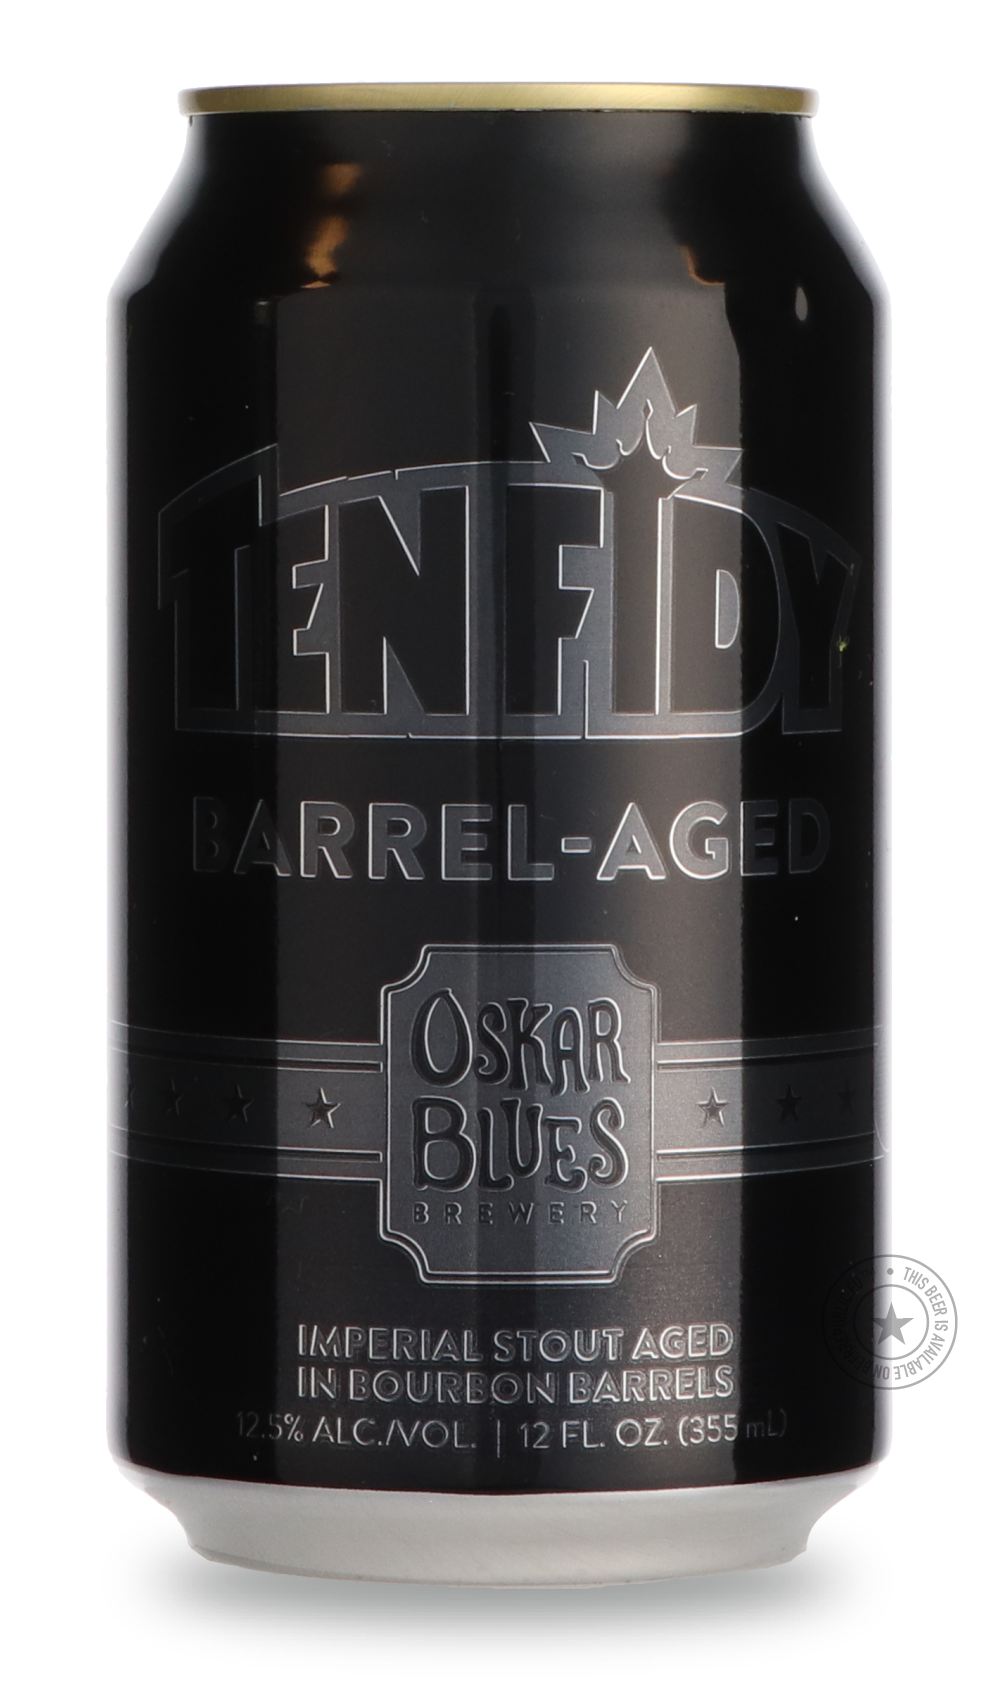 -Oskar Blues- Barrel-Aged Ten Fidy 2021-Stout & Porter- Only @ Beer Republic - The best online beer store for American & Canadian craft beer - Buy beer online from the USA and Canada - Bier online kopen - Amerikaans bier kopen - Craft beer store - Craft beer kopen - Amerikanisch bier kaufen - Bier online kaufen - Acheter biere online - IPA - Stout - Porter - New England IPA - Hazy IPA - Imperial Stout - Barrel Aged - Barrel Aged Imperial Stout - Brown - Dark beer - Blond - Blonde - Pilsner - Lager - Wheat -